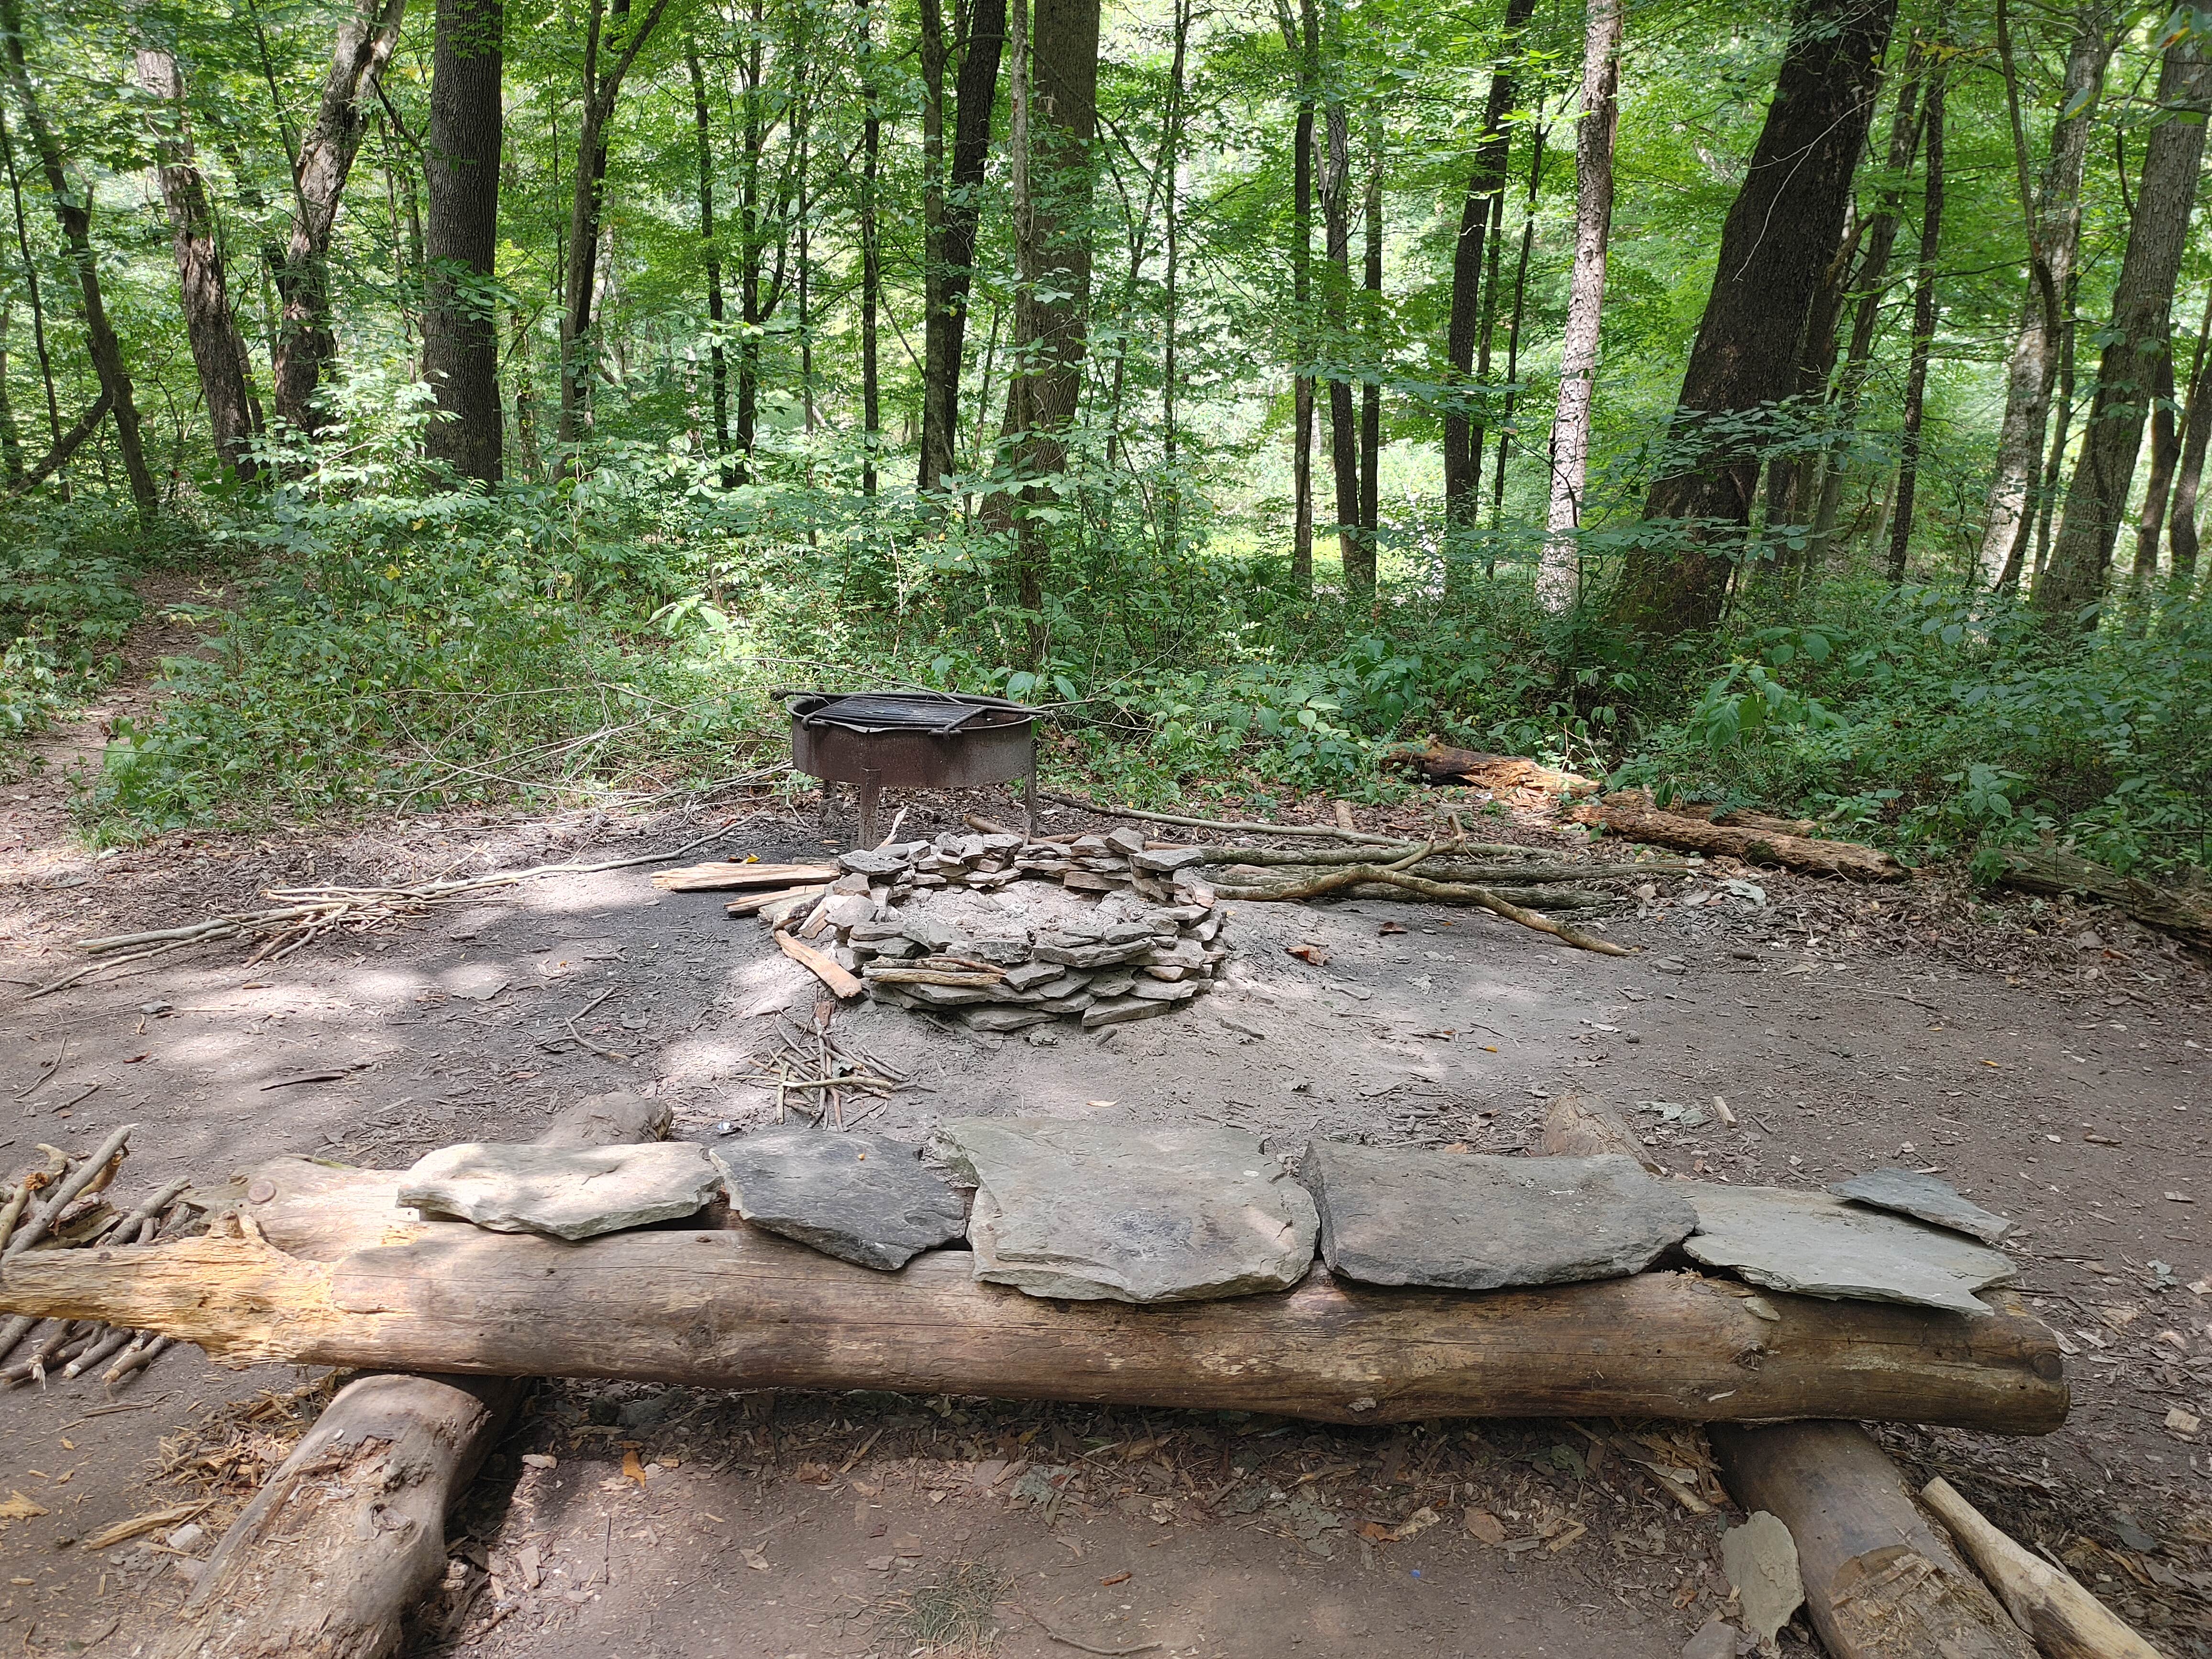 Love the creative rock bench for sitting by the fire.